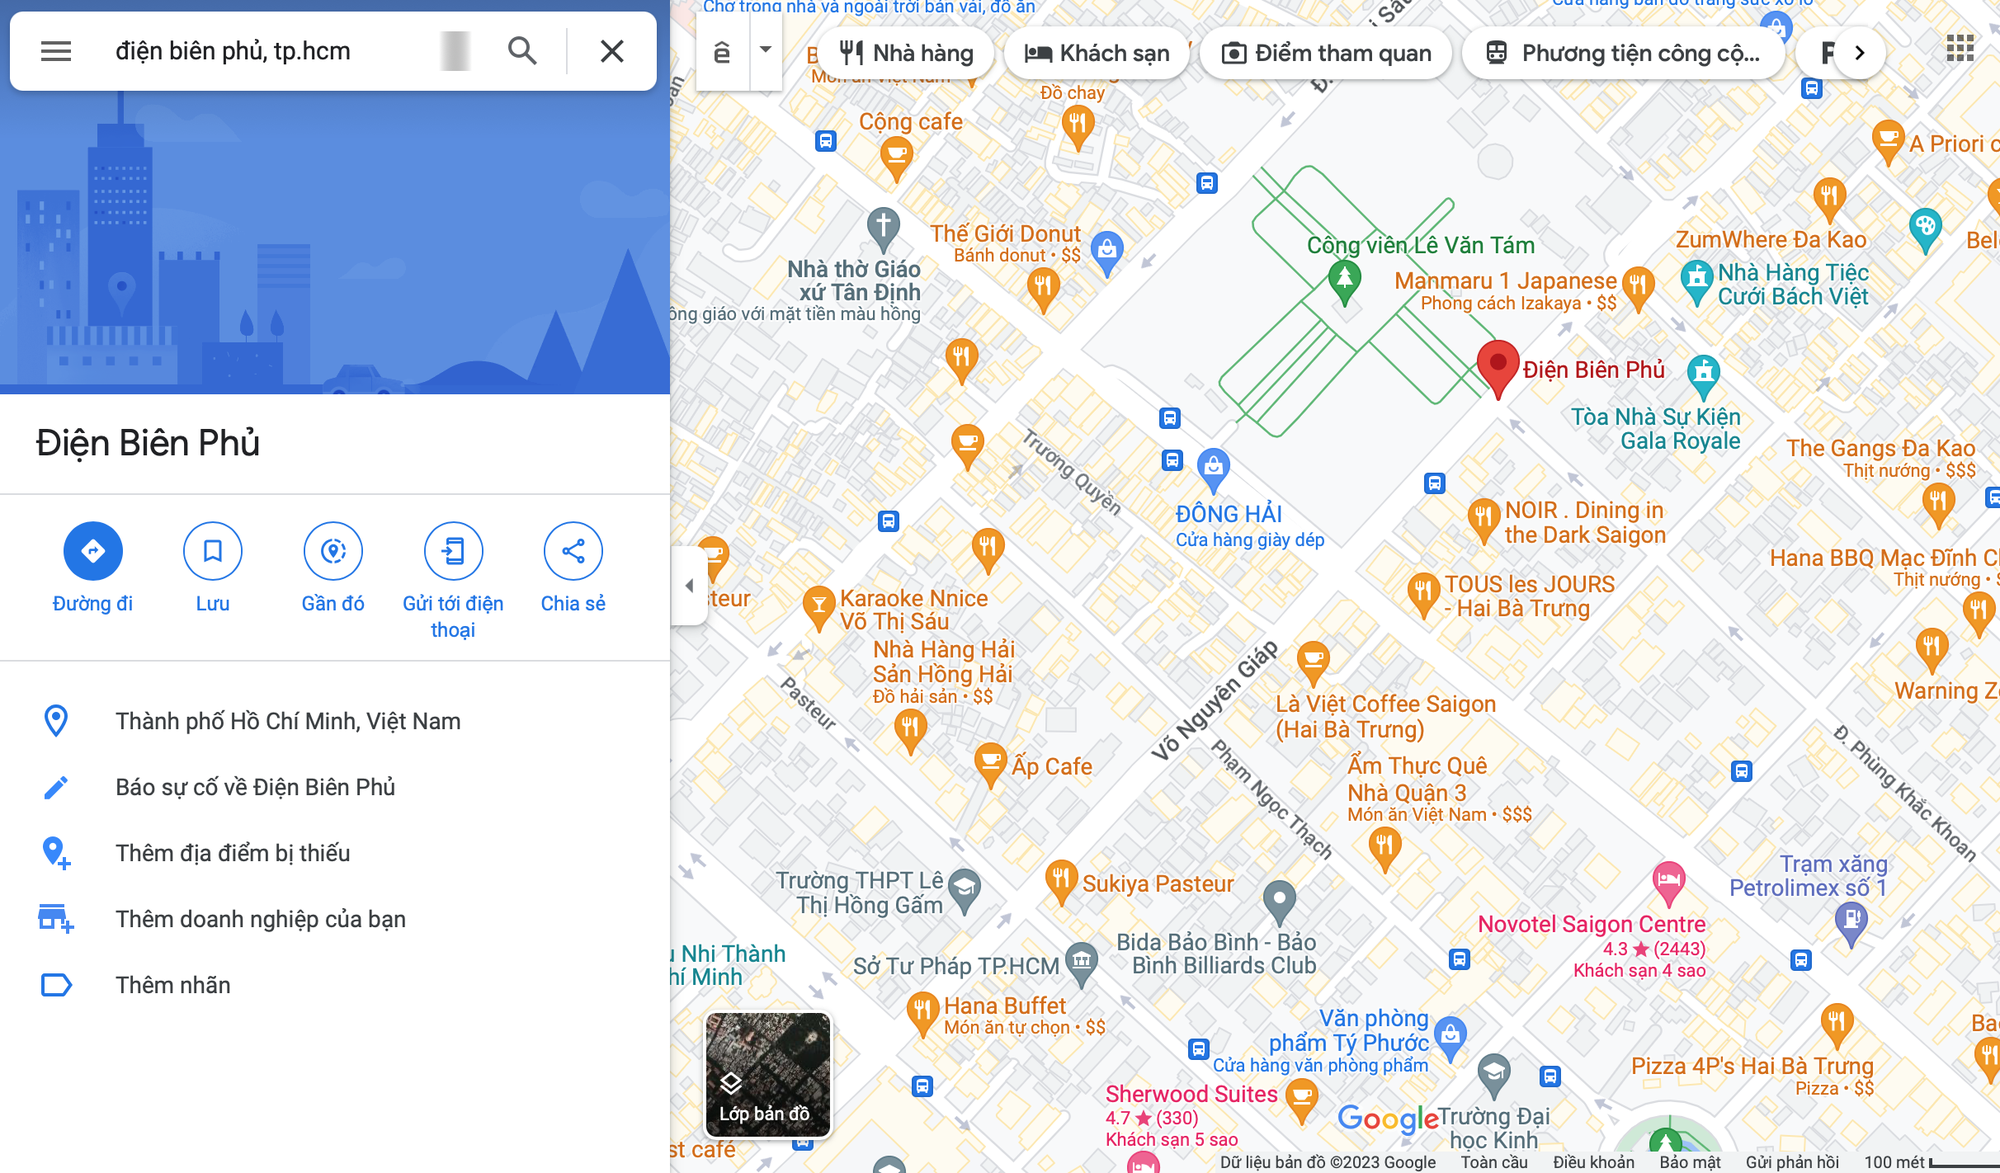 Google Maps mistakes major road in Ho Chi Minh City